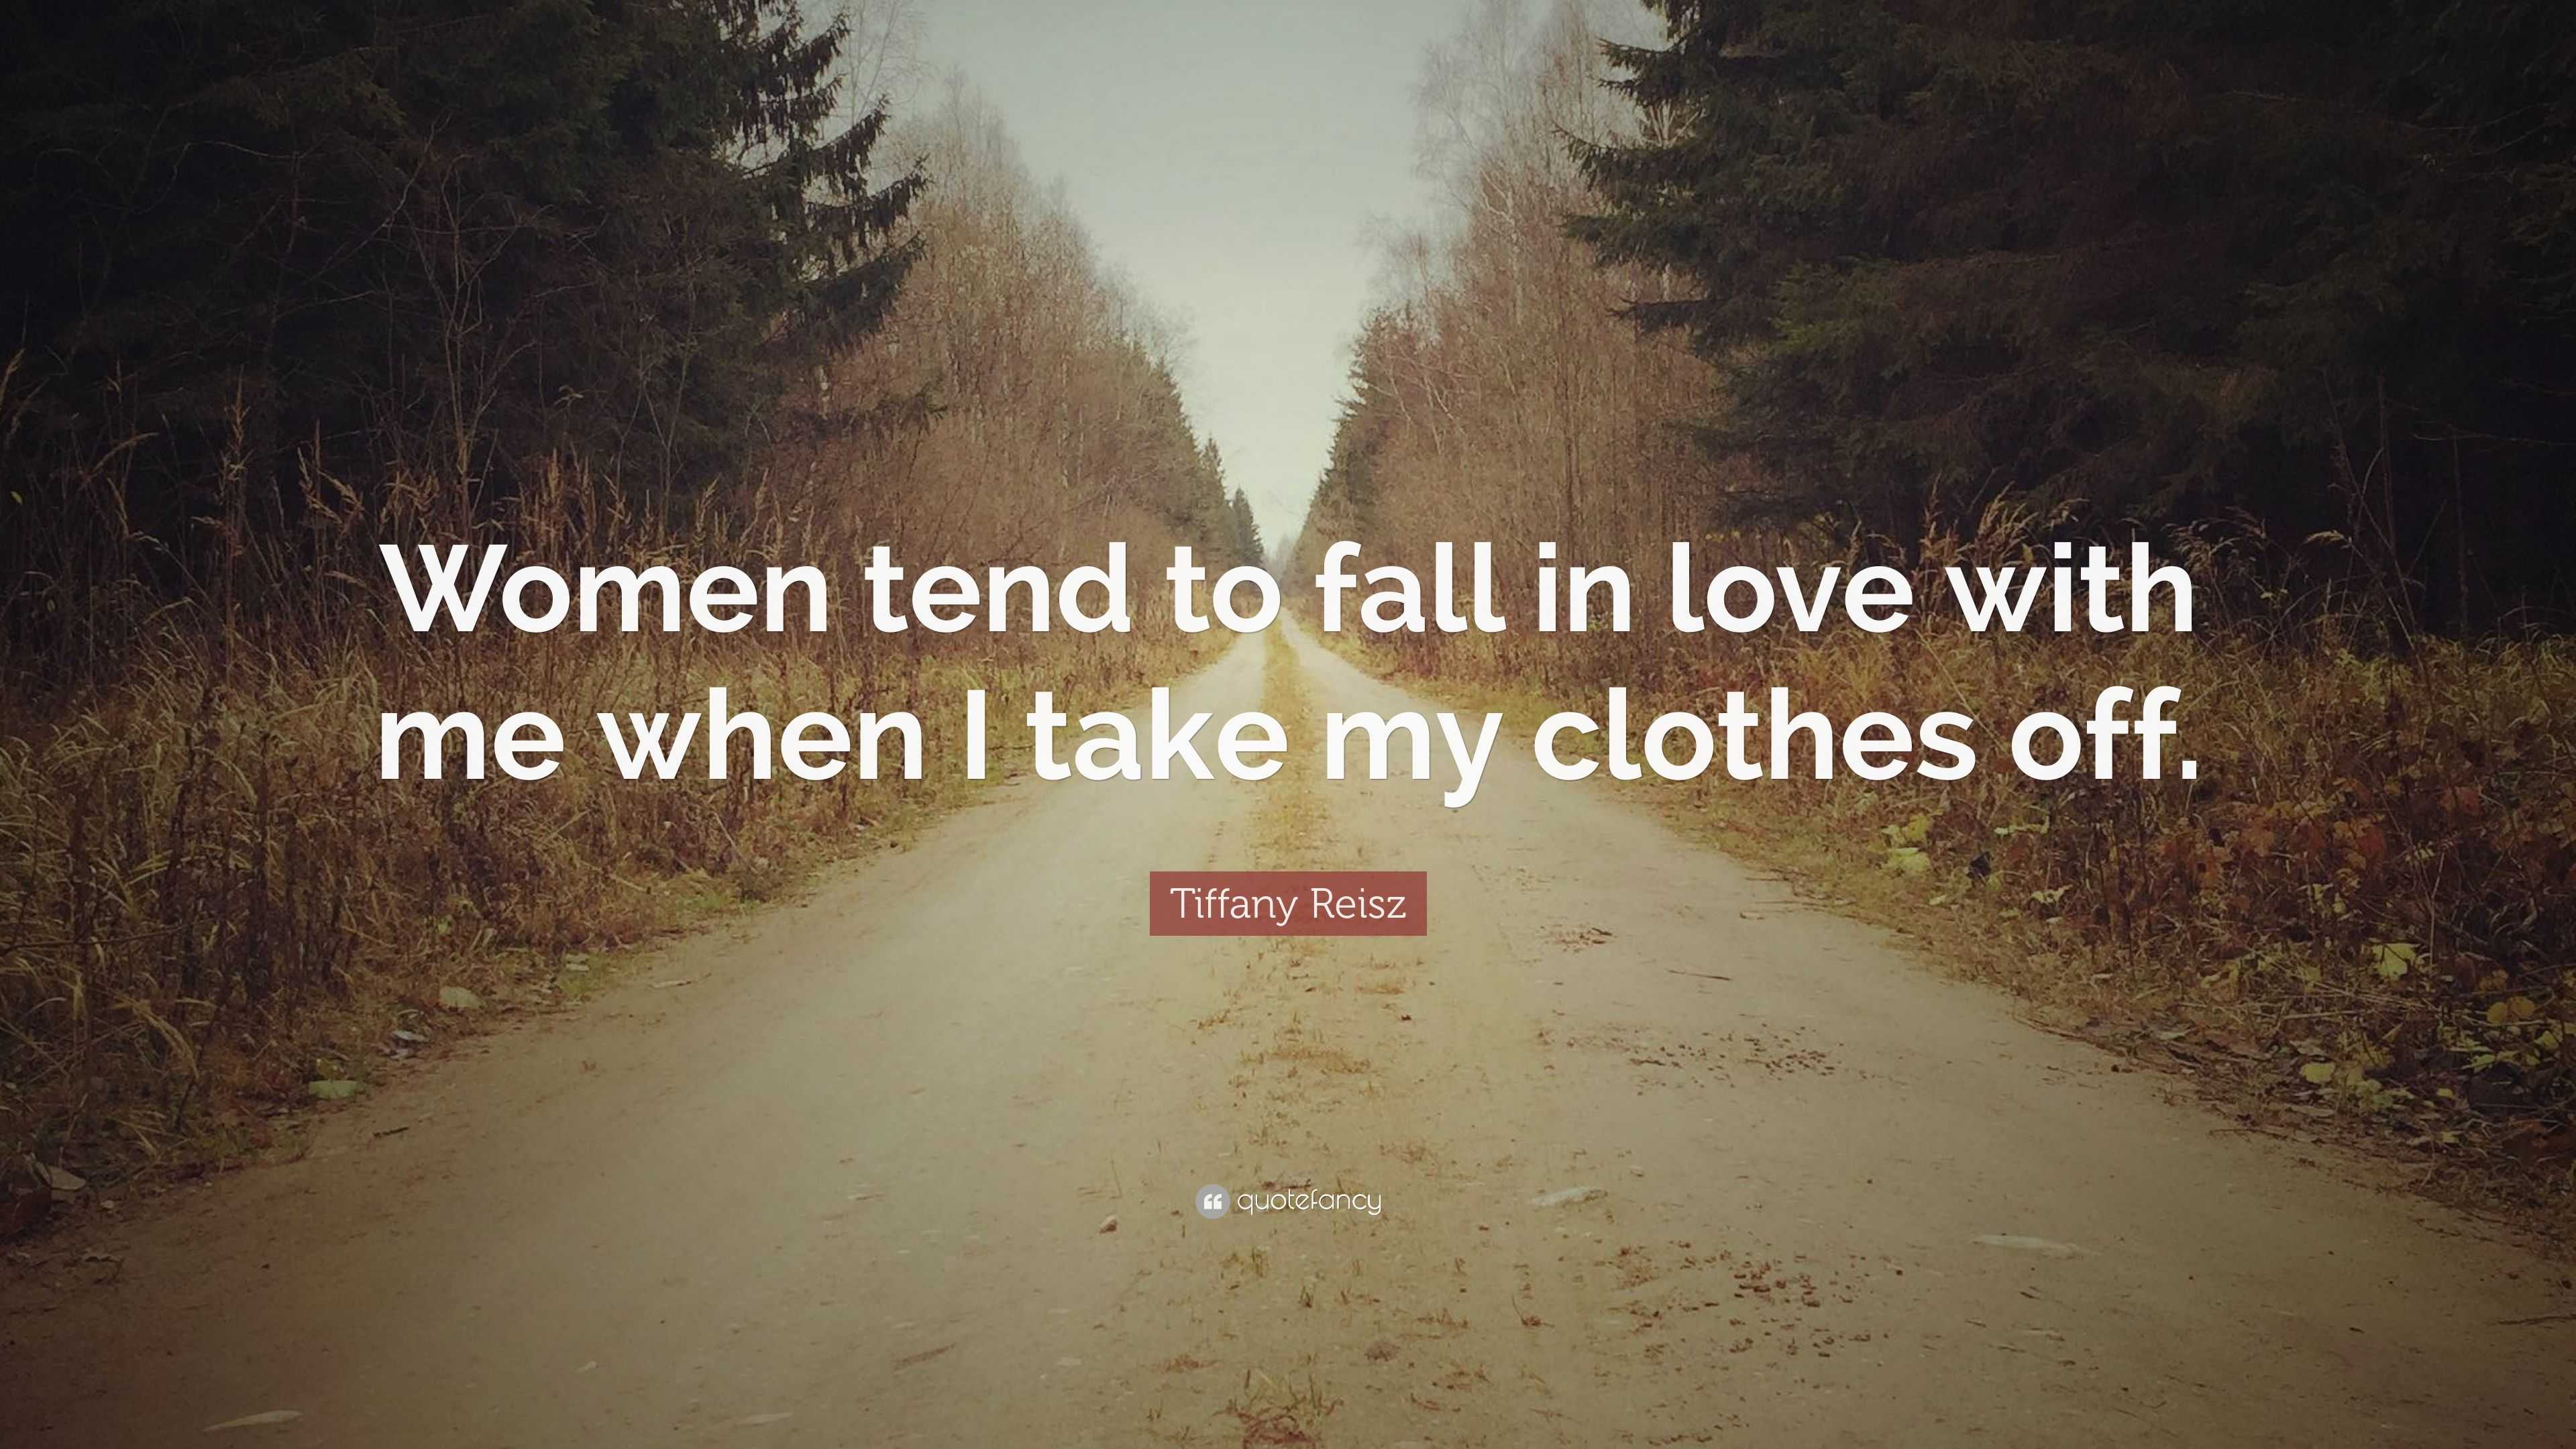 Tiffany Reisz Quote “women Tend To Fall In Love With Me When I Take My 